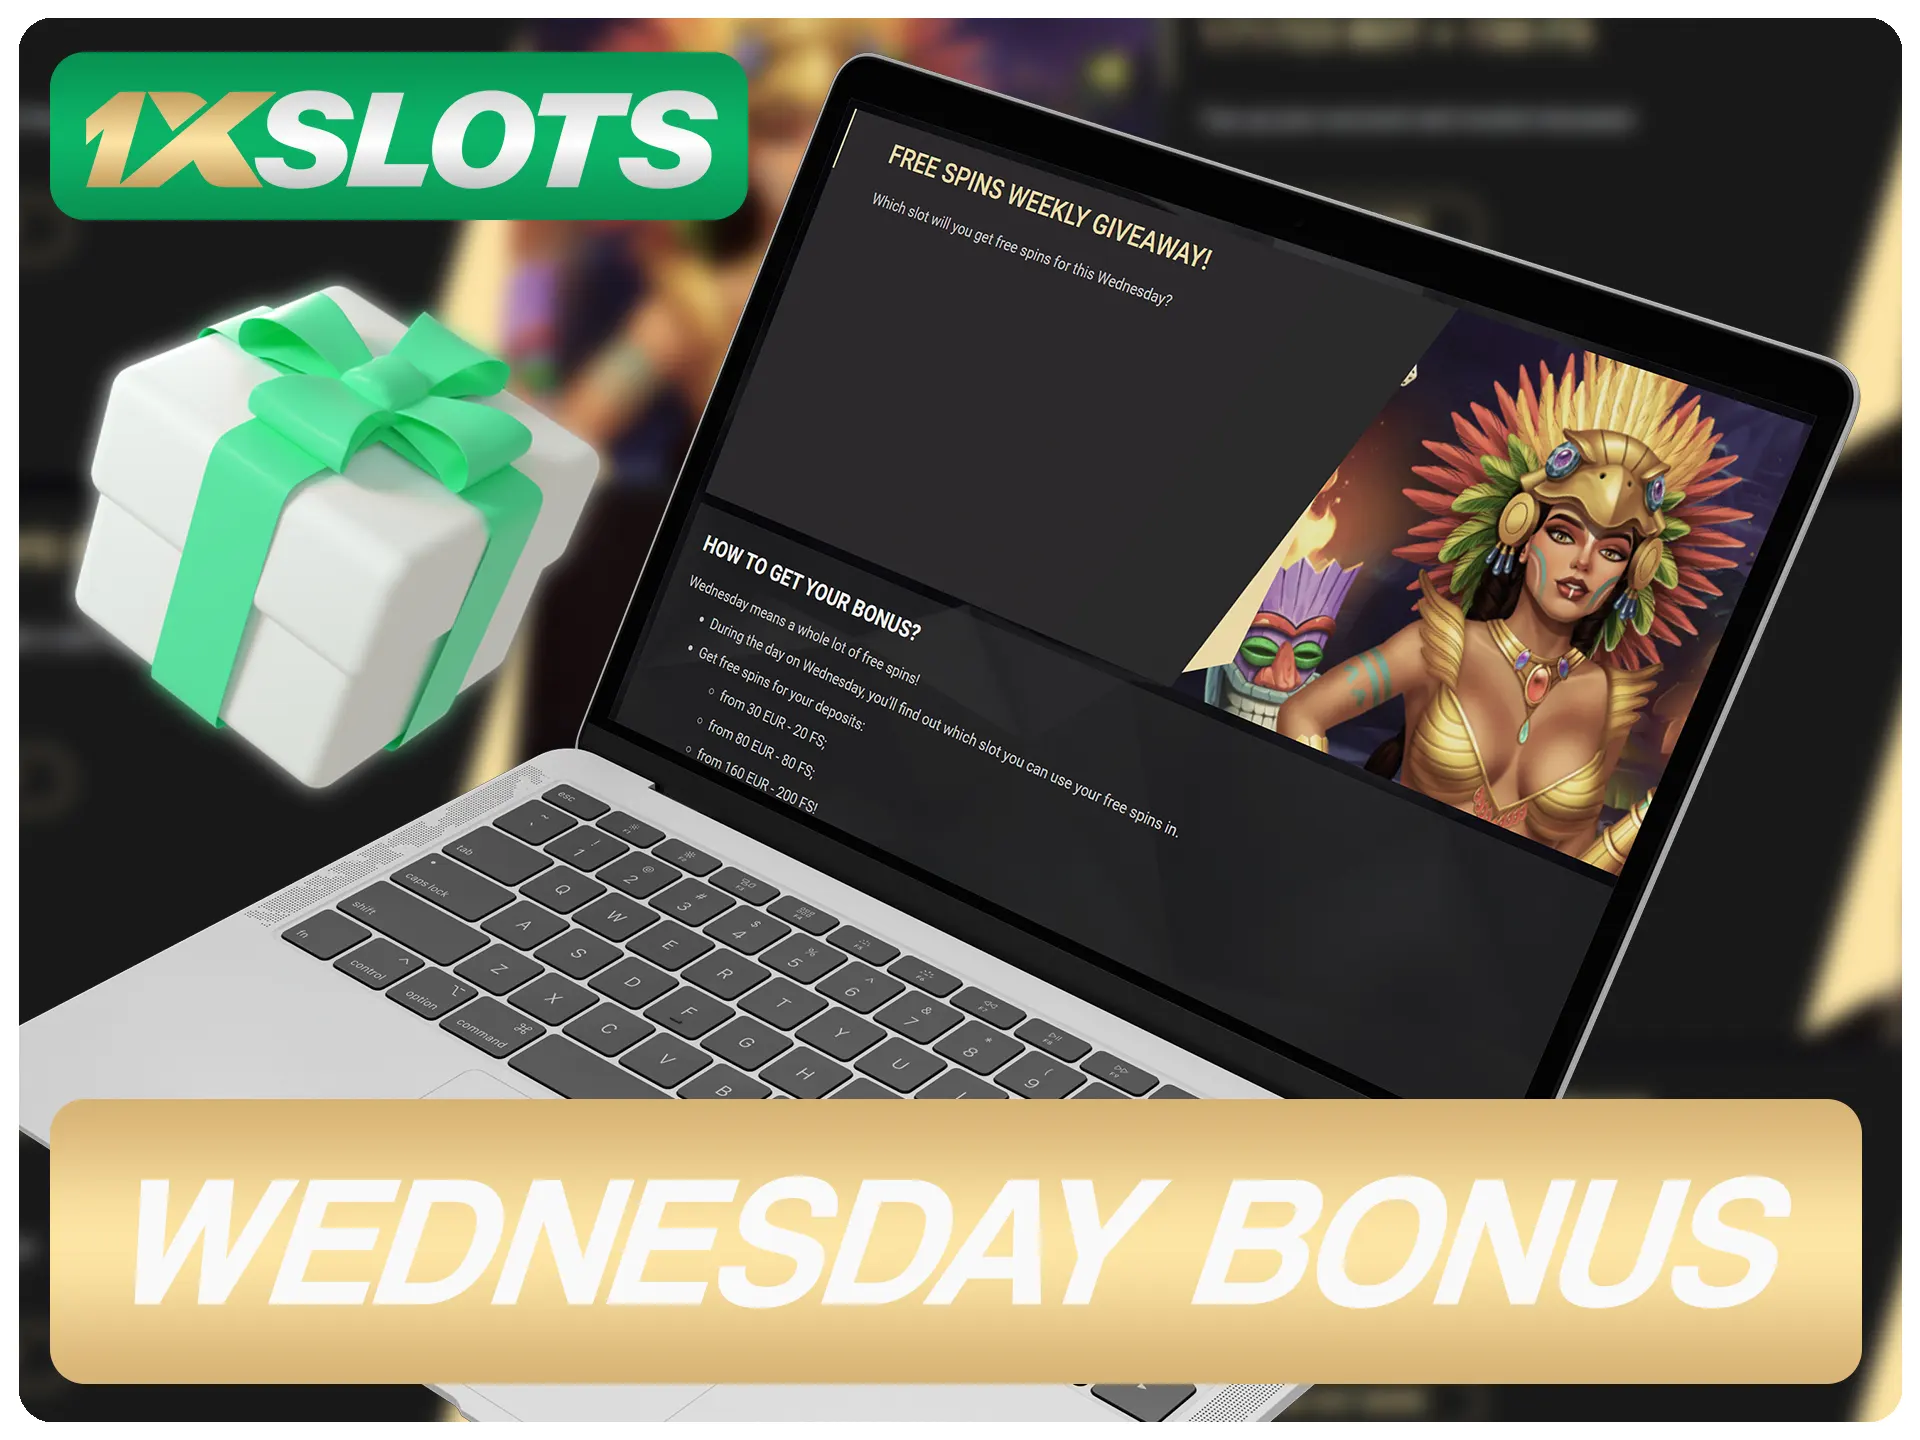 Visit 1xSlots promotions page and claim your wednesday bonus.